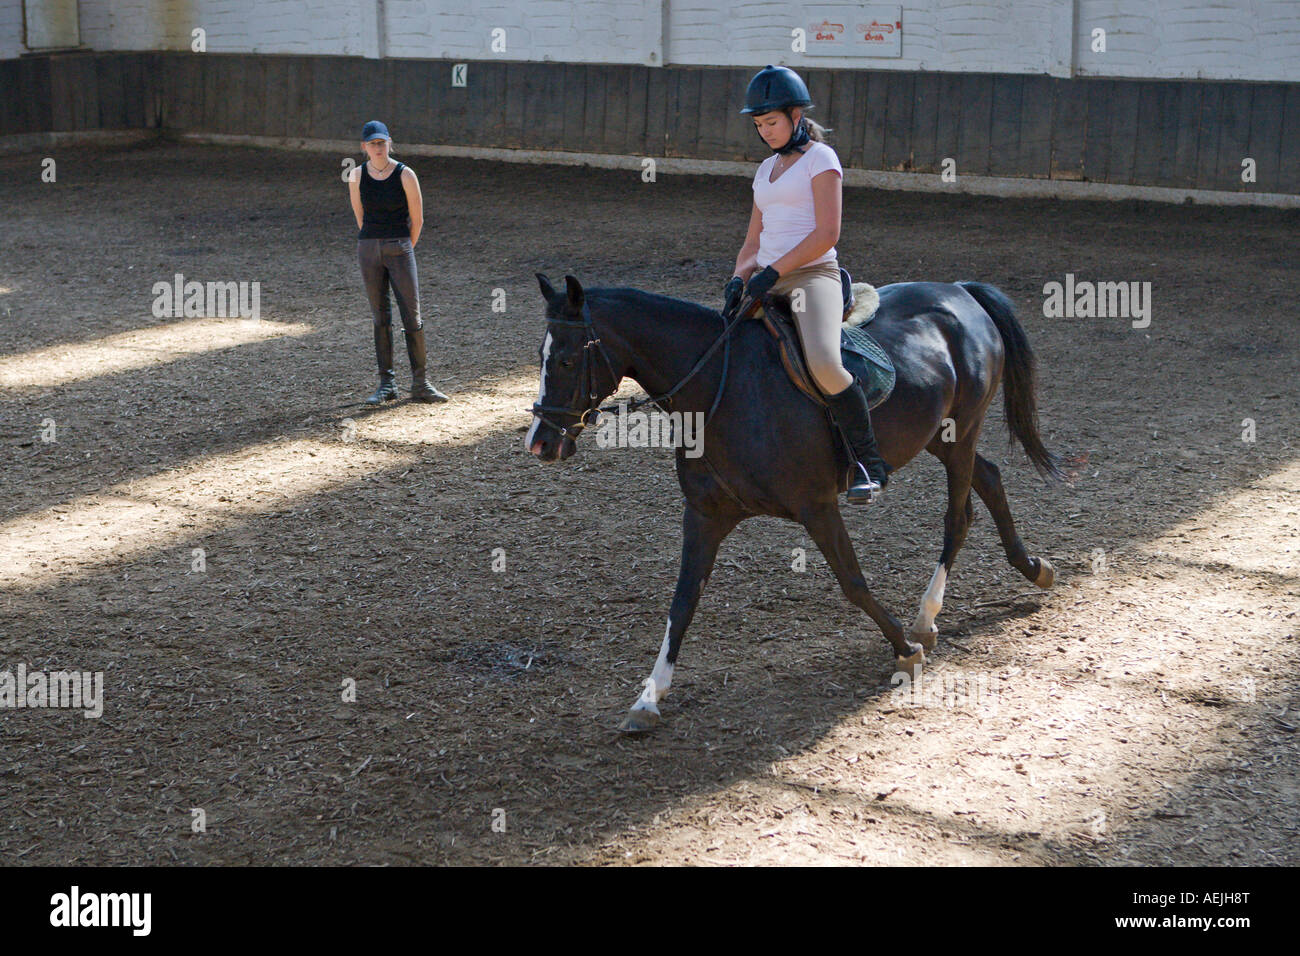 Teenager with the riding lessons in a indoor riding arena, Germany. Stock Photo